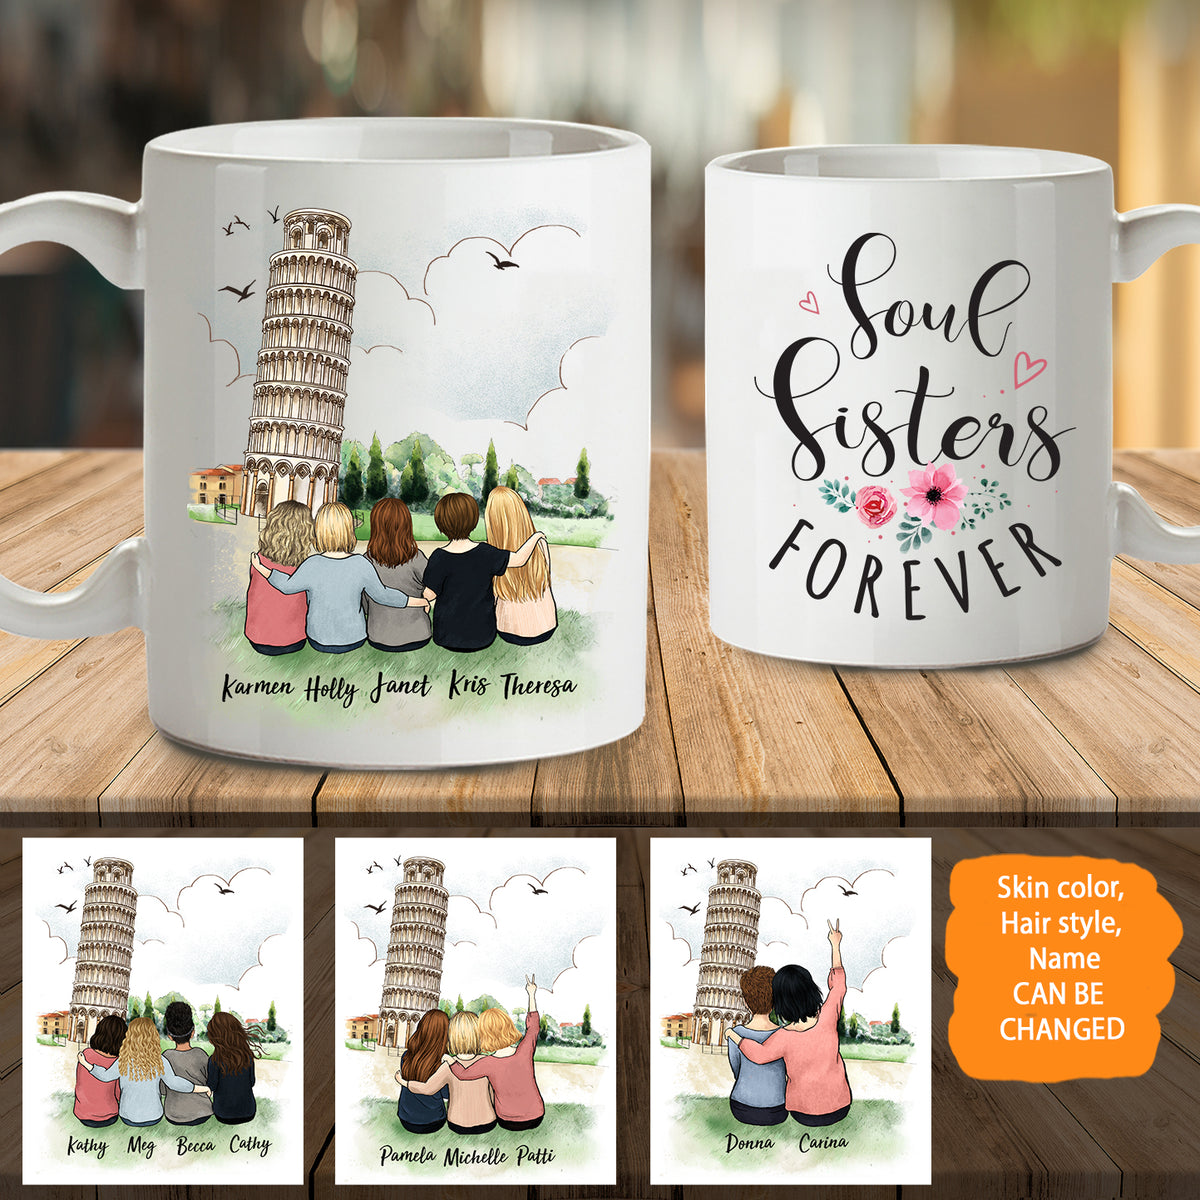 Personalized Best Friend Pisa Coffee Mugs - Soul sisters forever